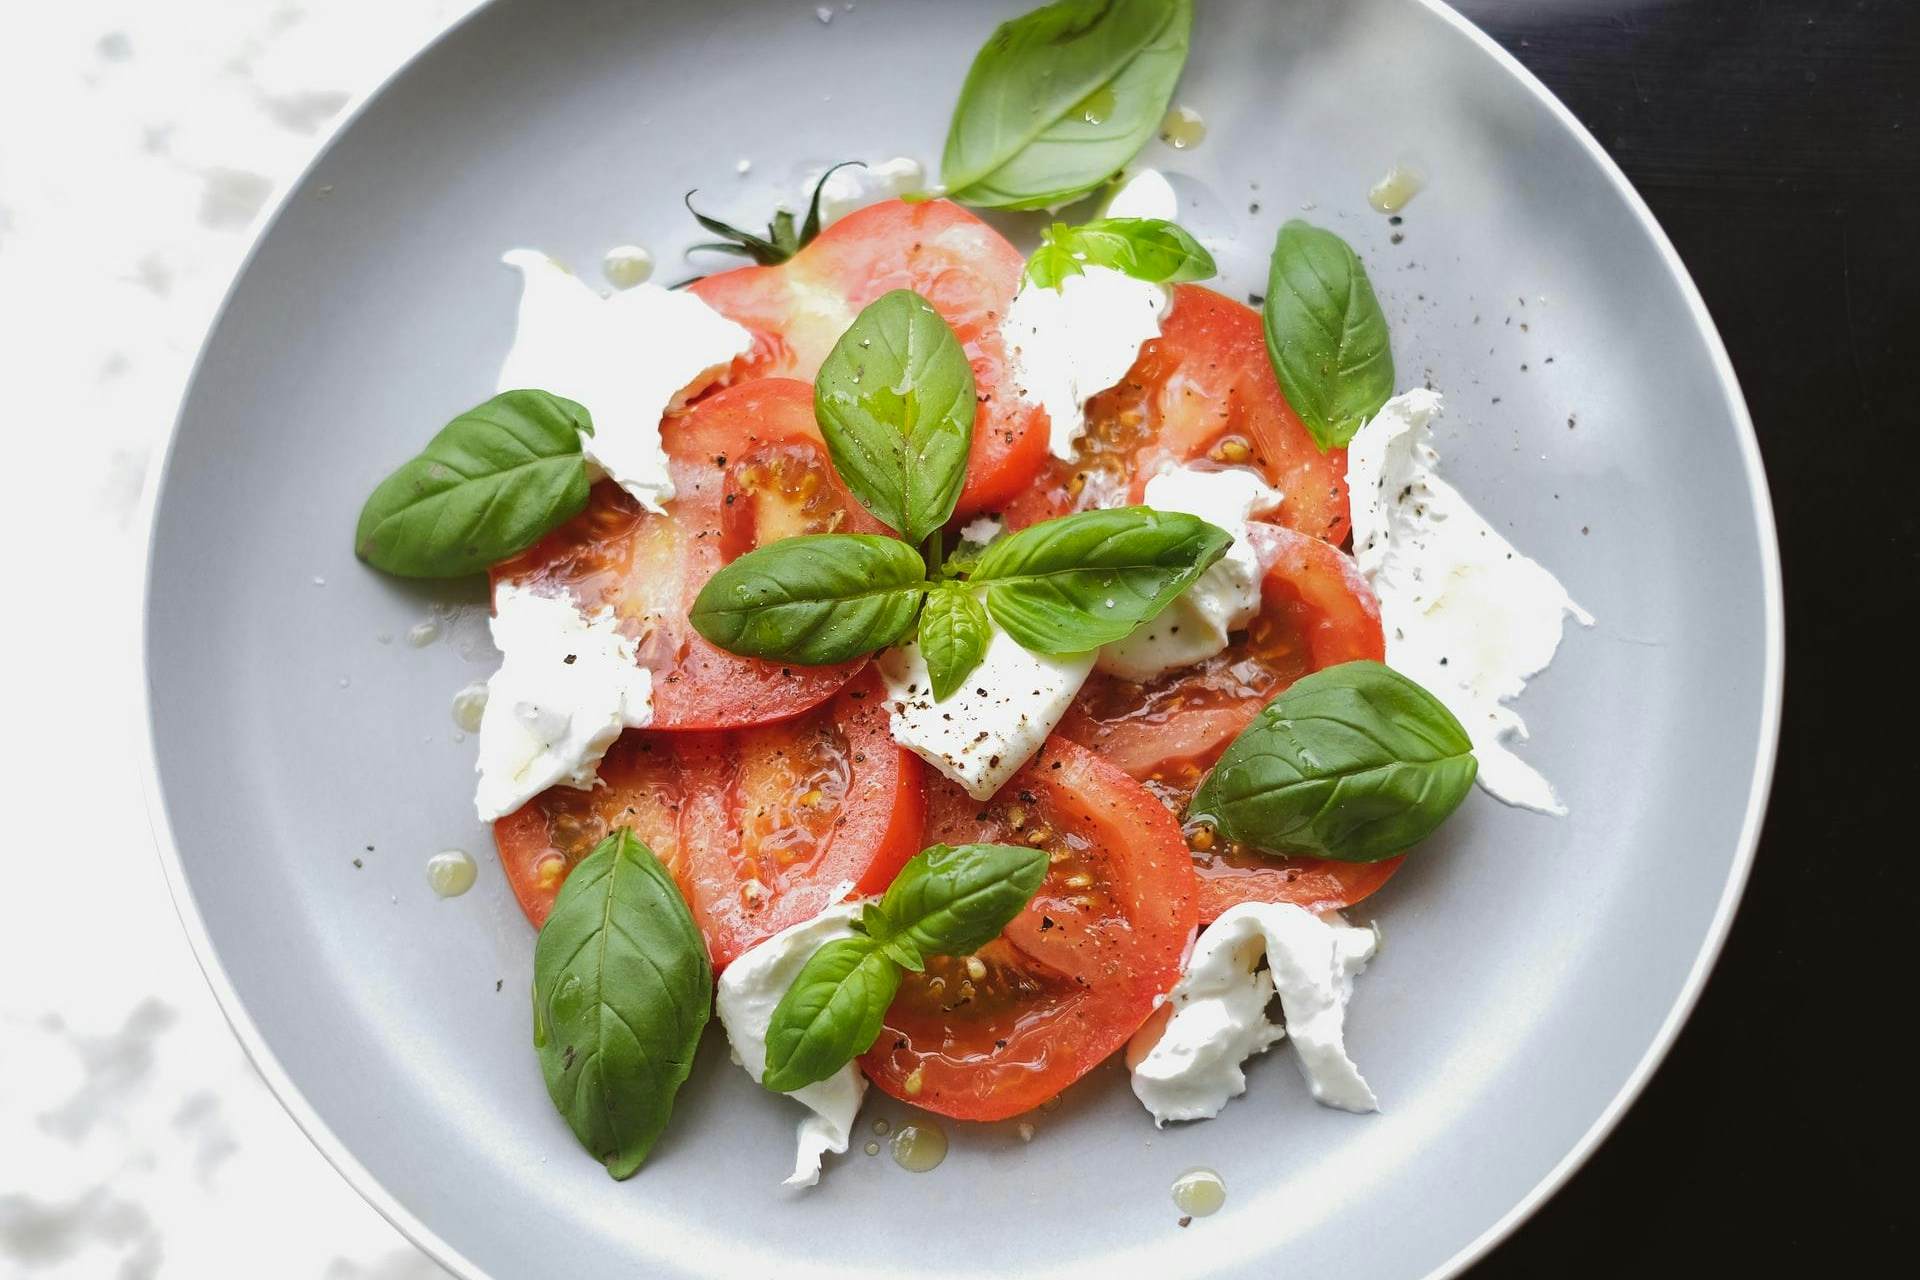 Inspiring Italian Recipes with No Pizza or Pasta in Sight!